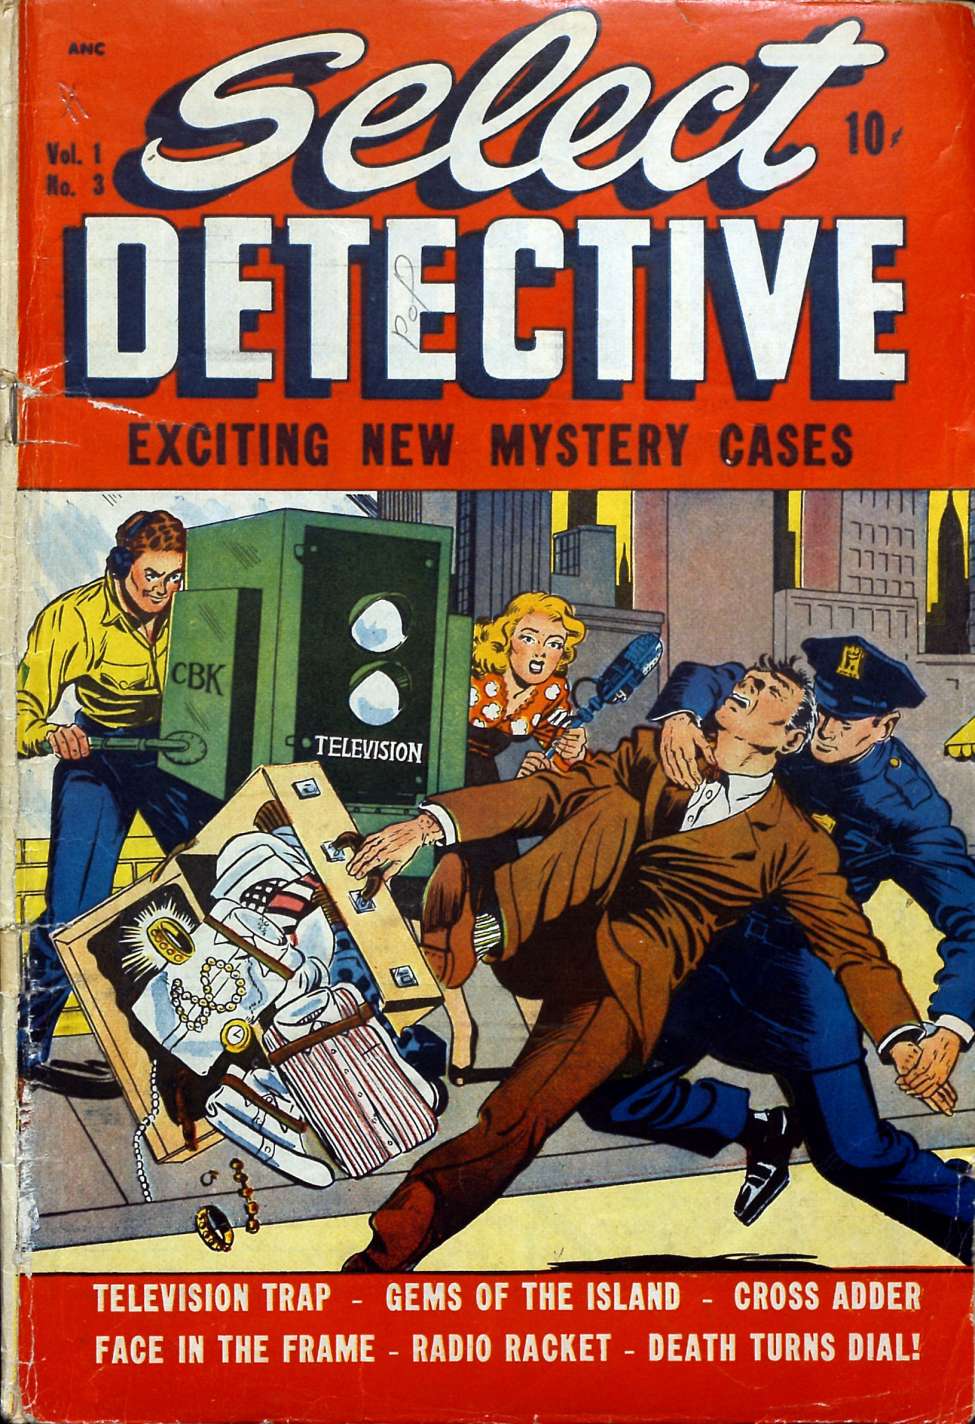 featuring detective v1.30